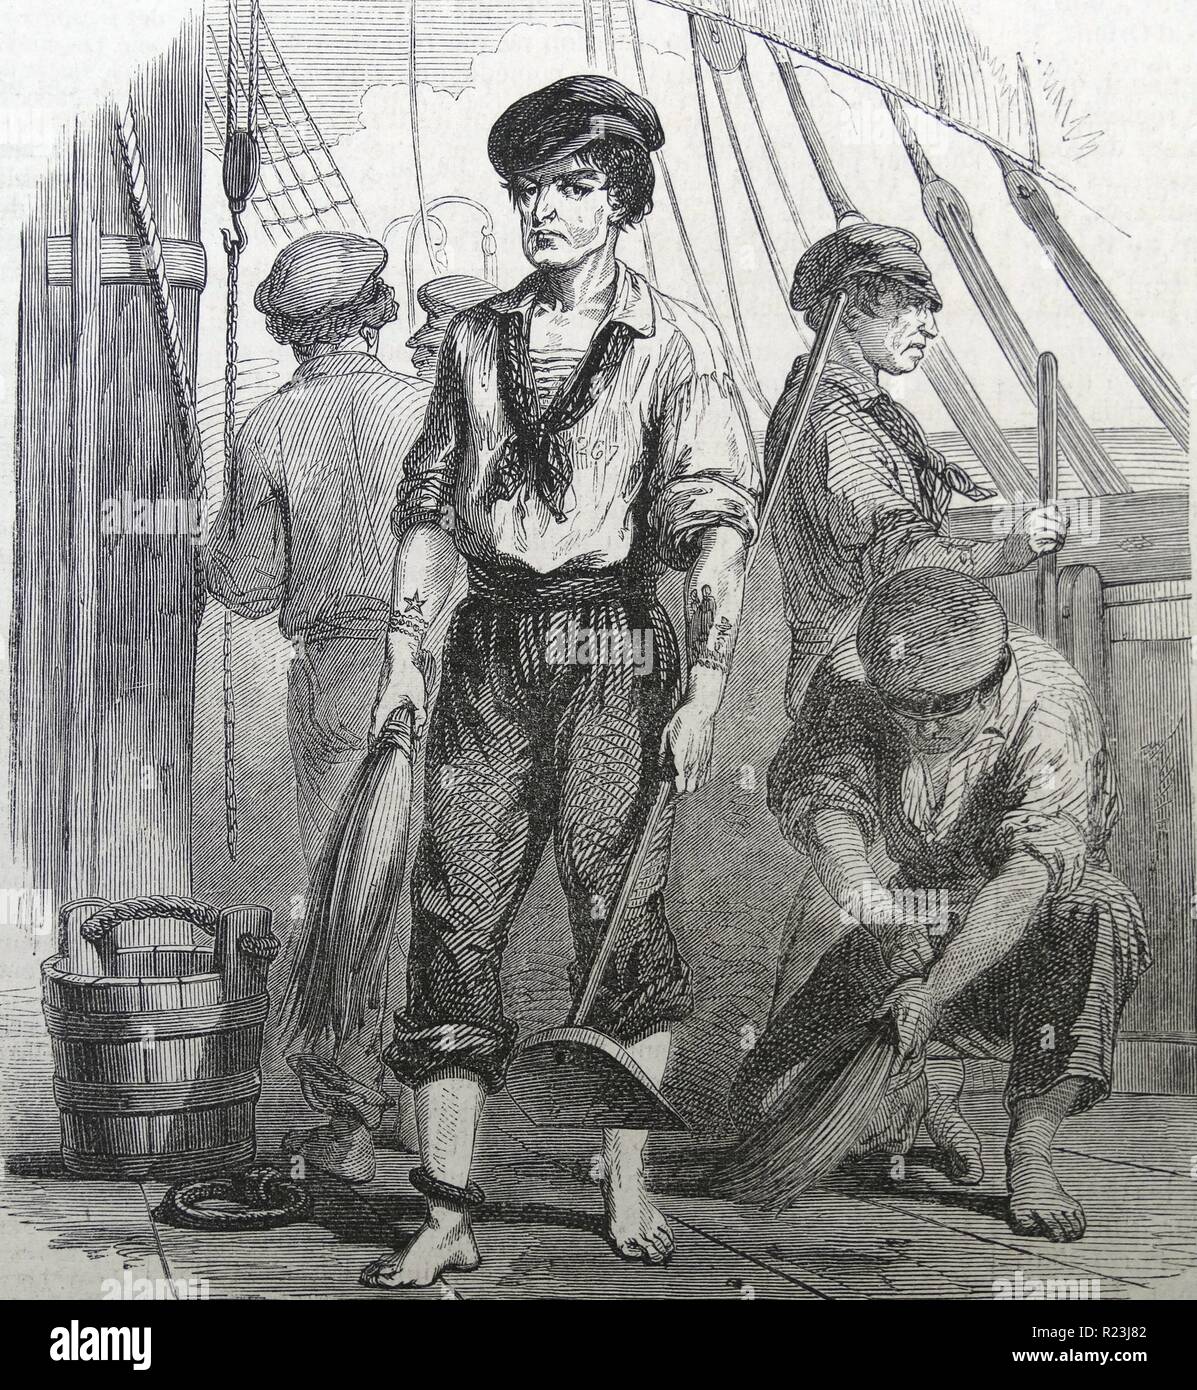 Illustration depicting convicts performing chores aboard the transport ship. Dated 1820 Stock Photo